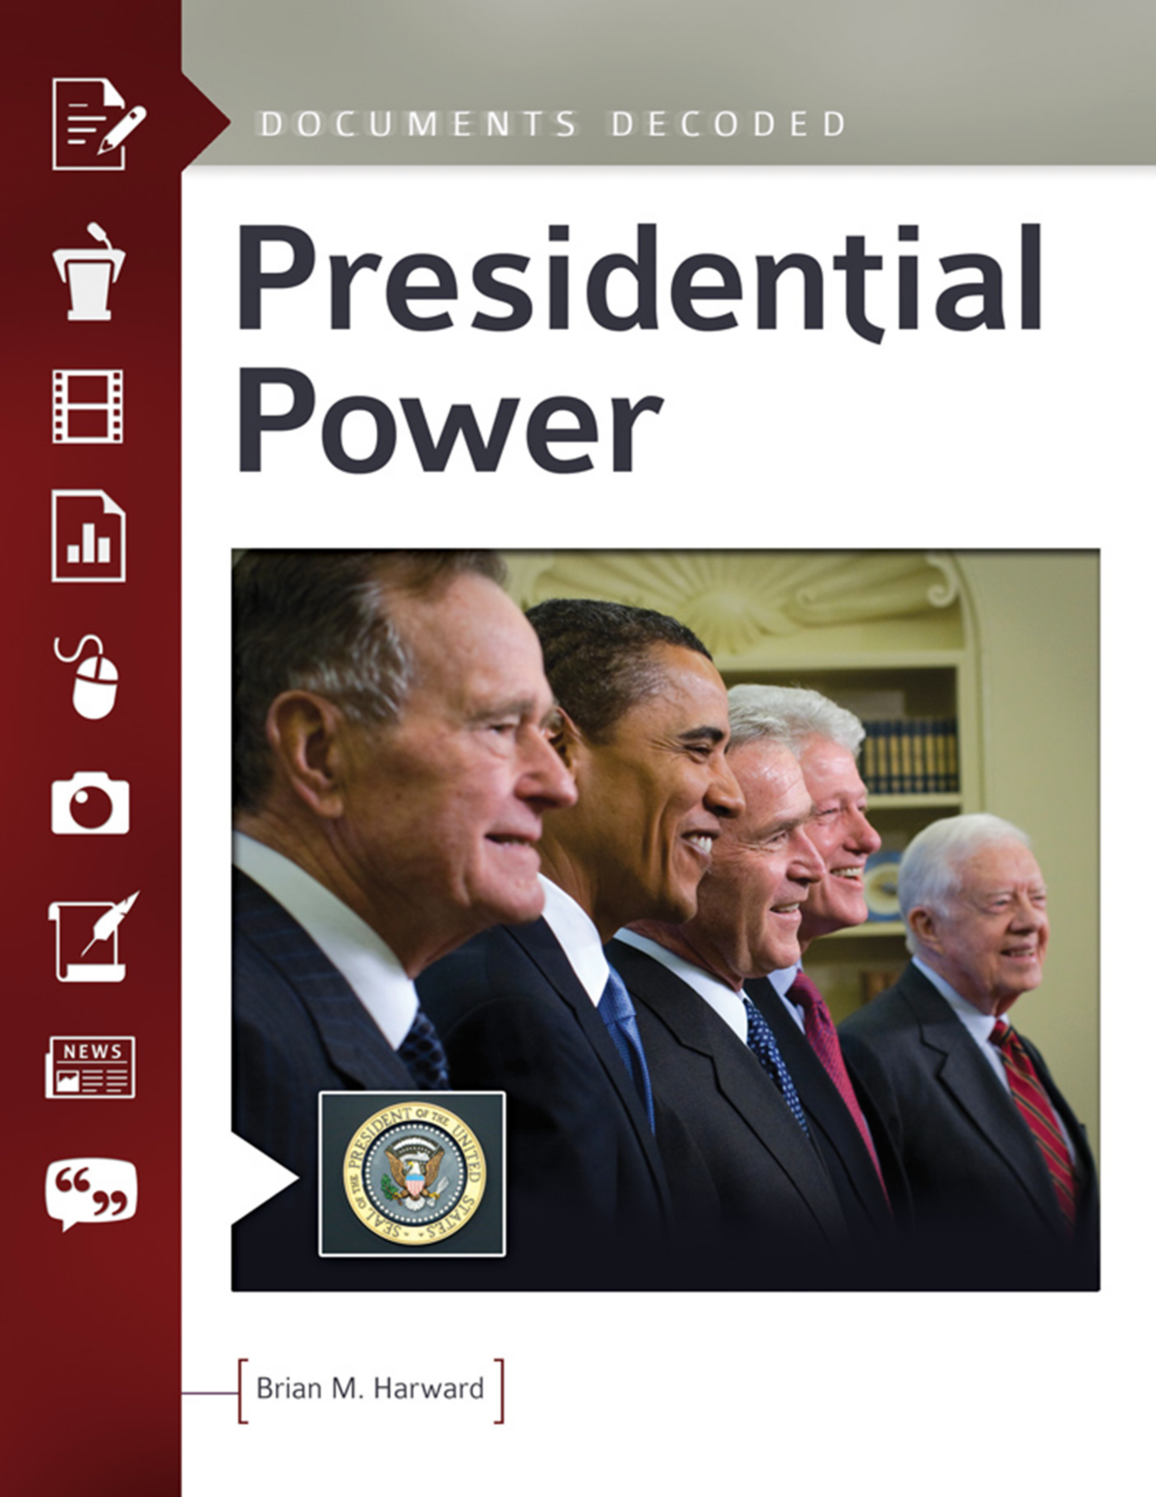 Presidential Power: Documents Decoded page Cover1